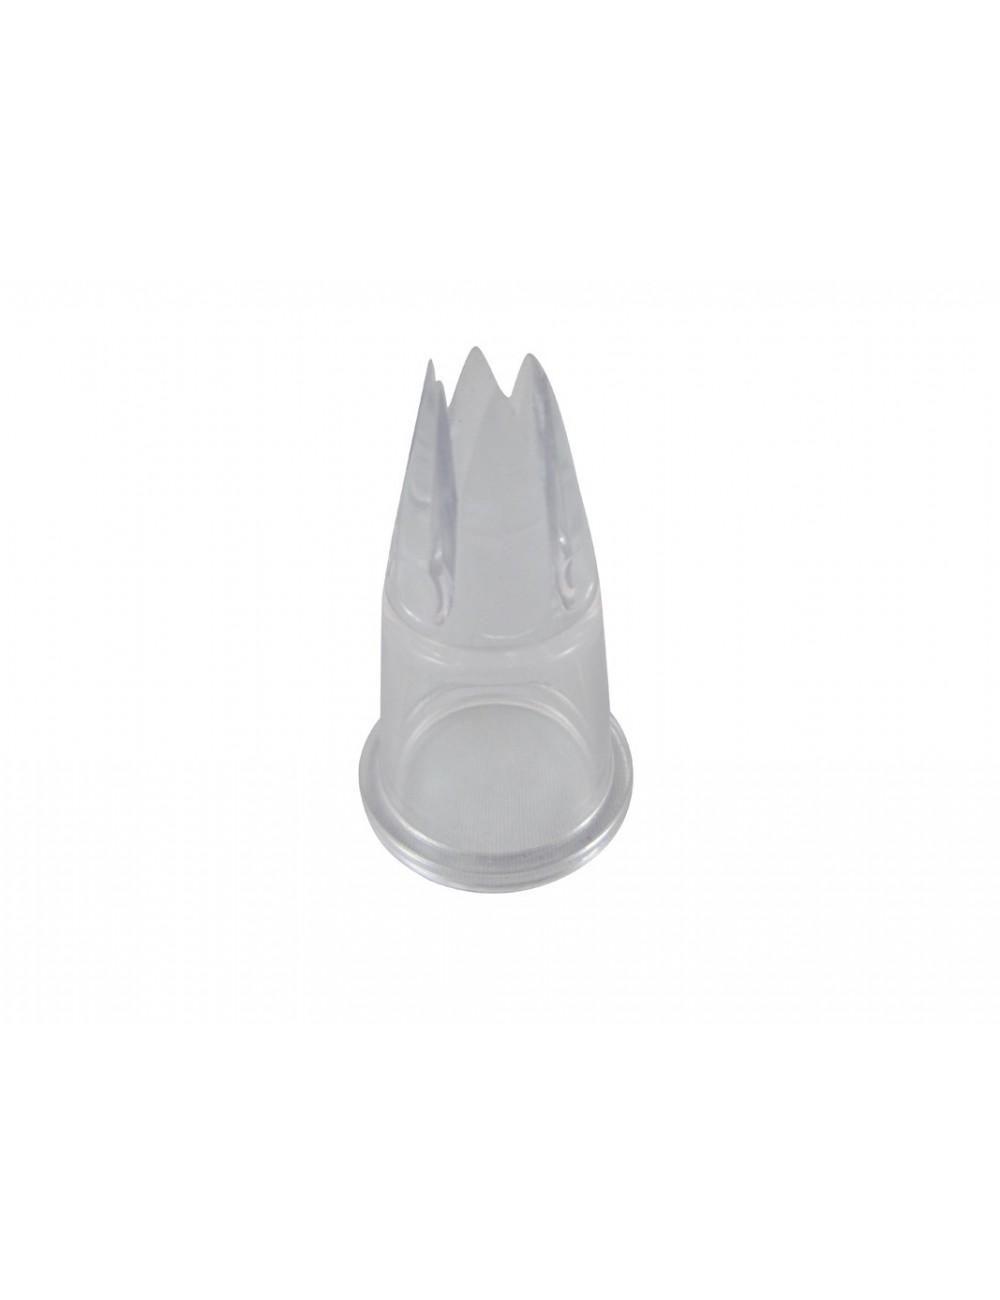 FLUTED NOZZLE F - COPOLYESTER